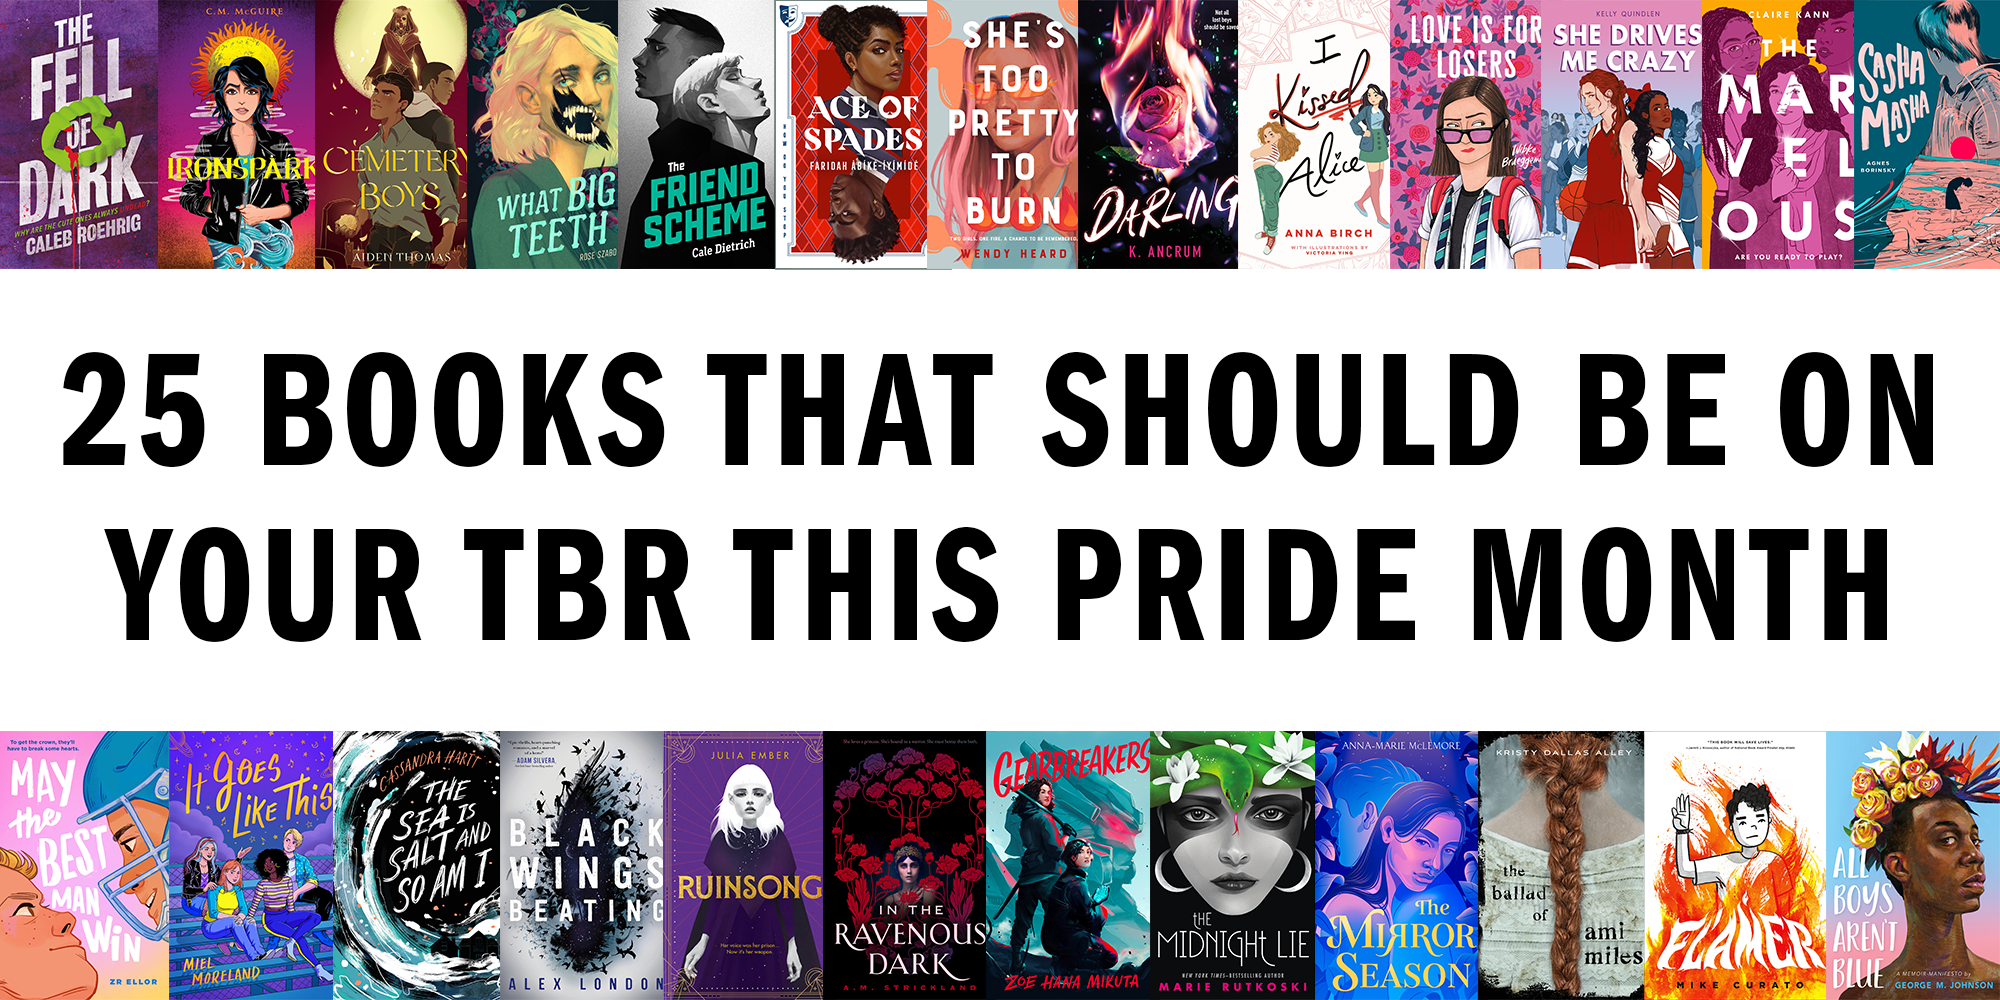 25 Books That Should Be On Your TBR This Pride Month